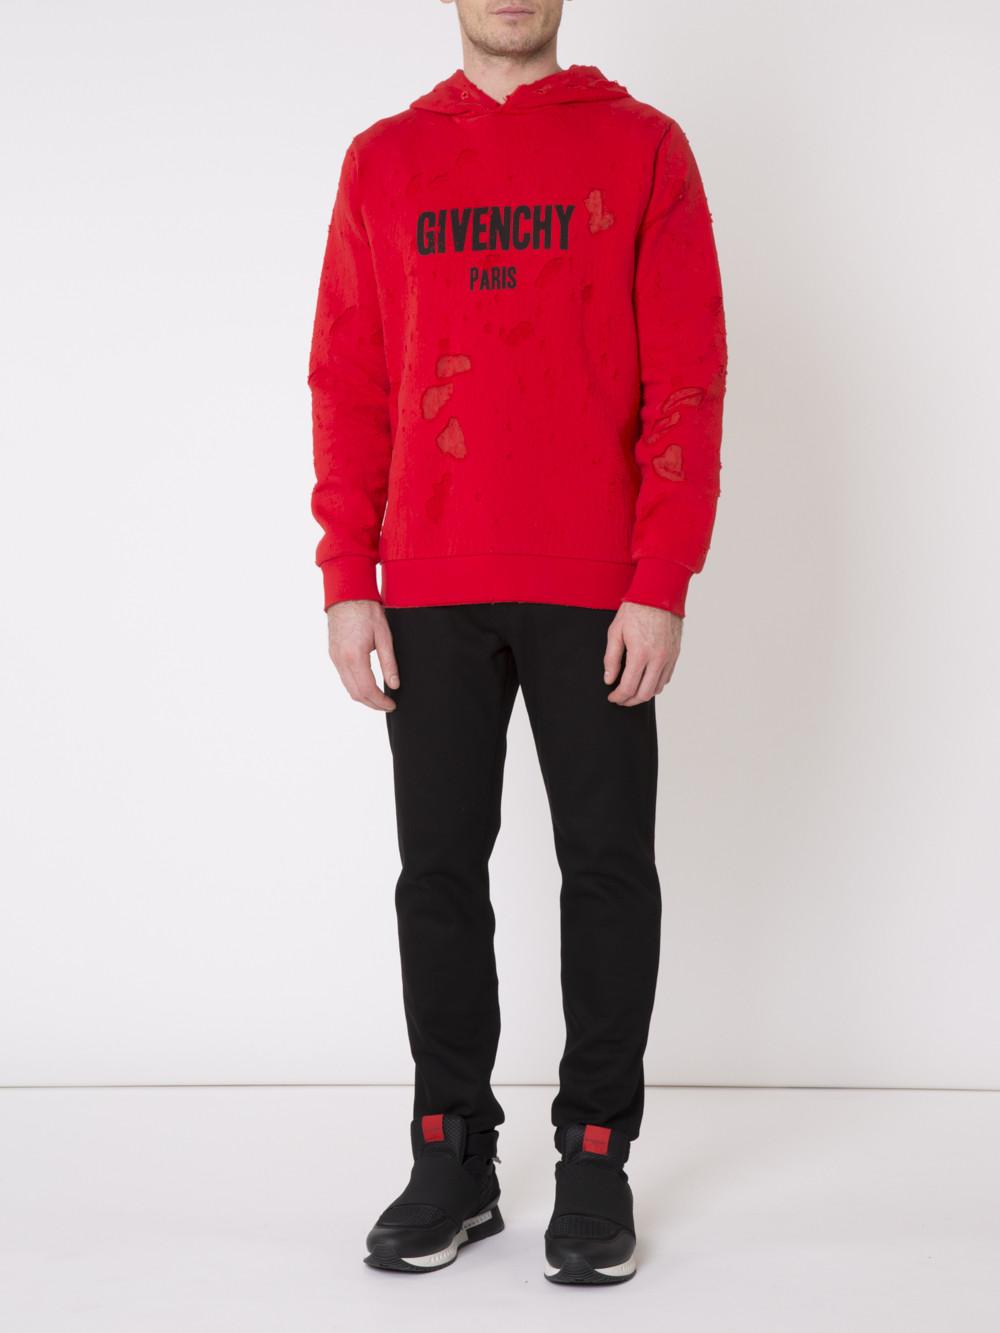 Givenchy Destroyed Hoodie in Red for Men - Save 1% | Lyst